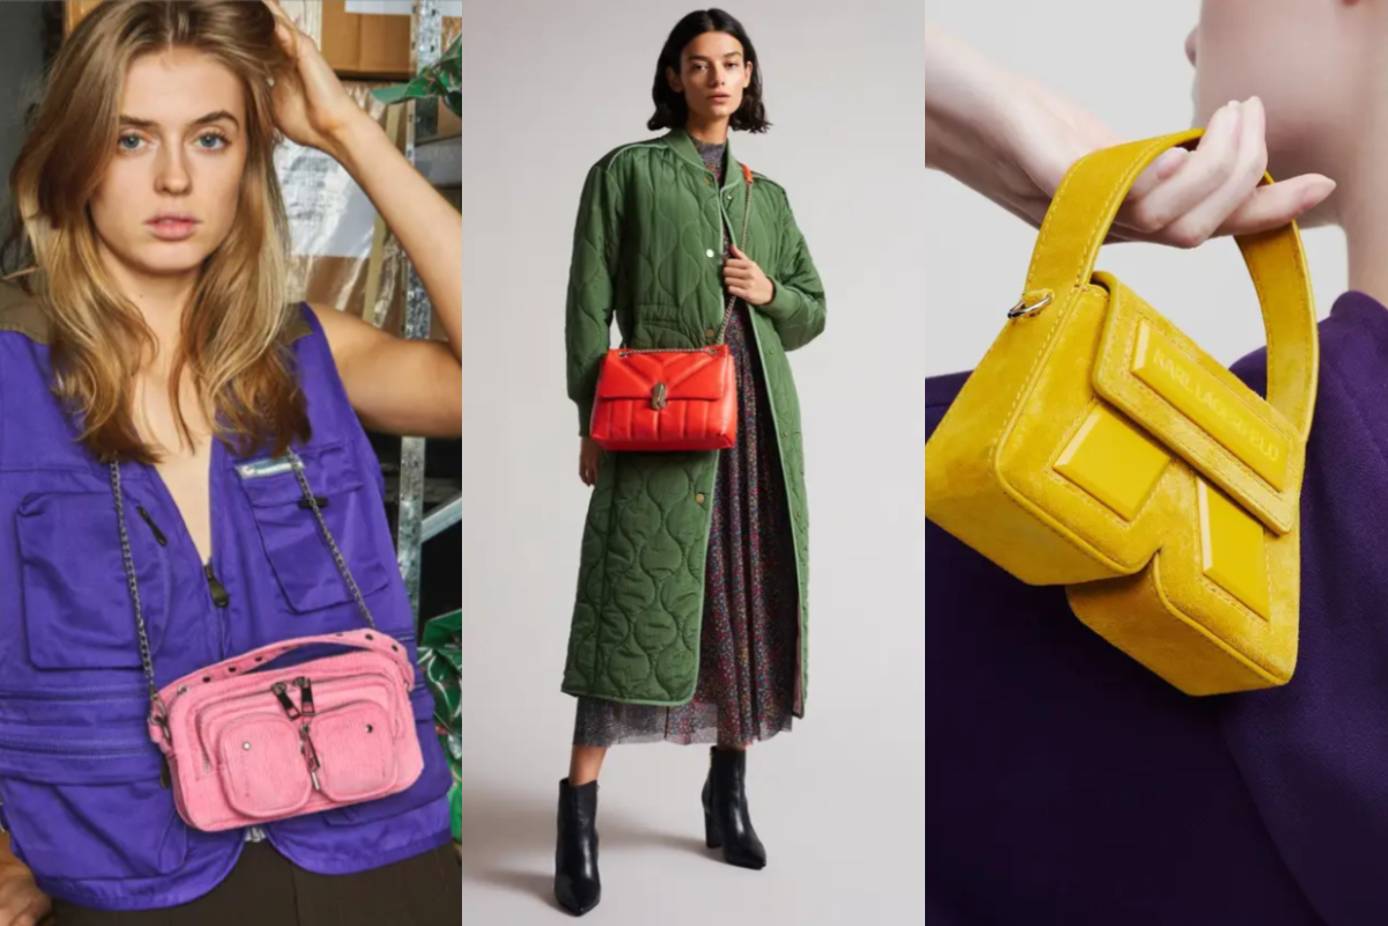 What Bag Color Is Popular For 2019?